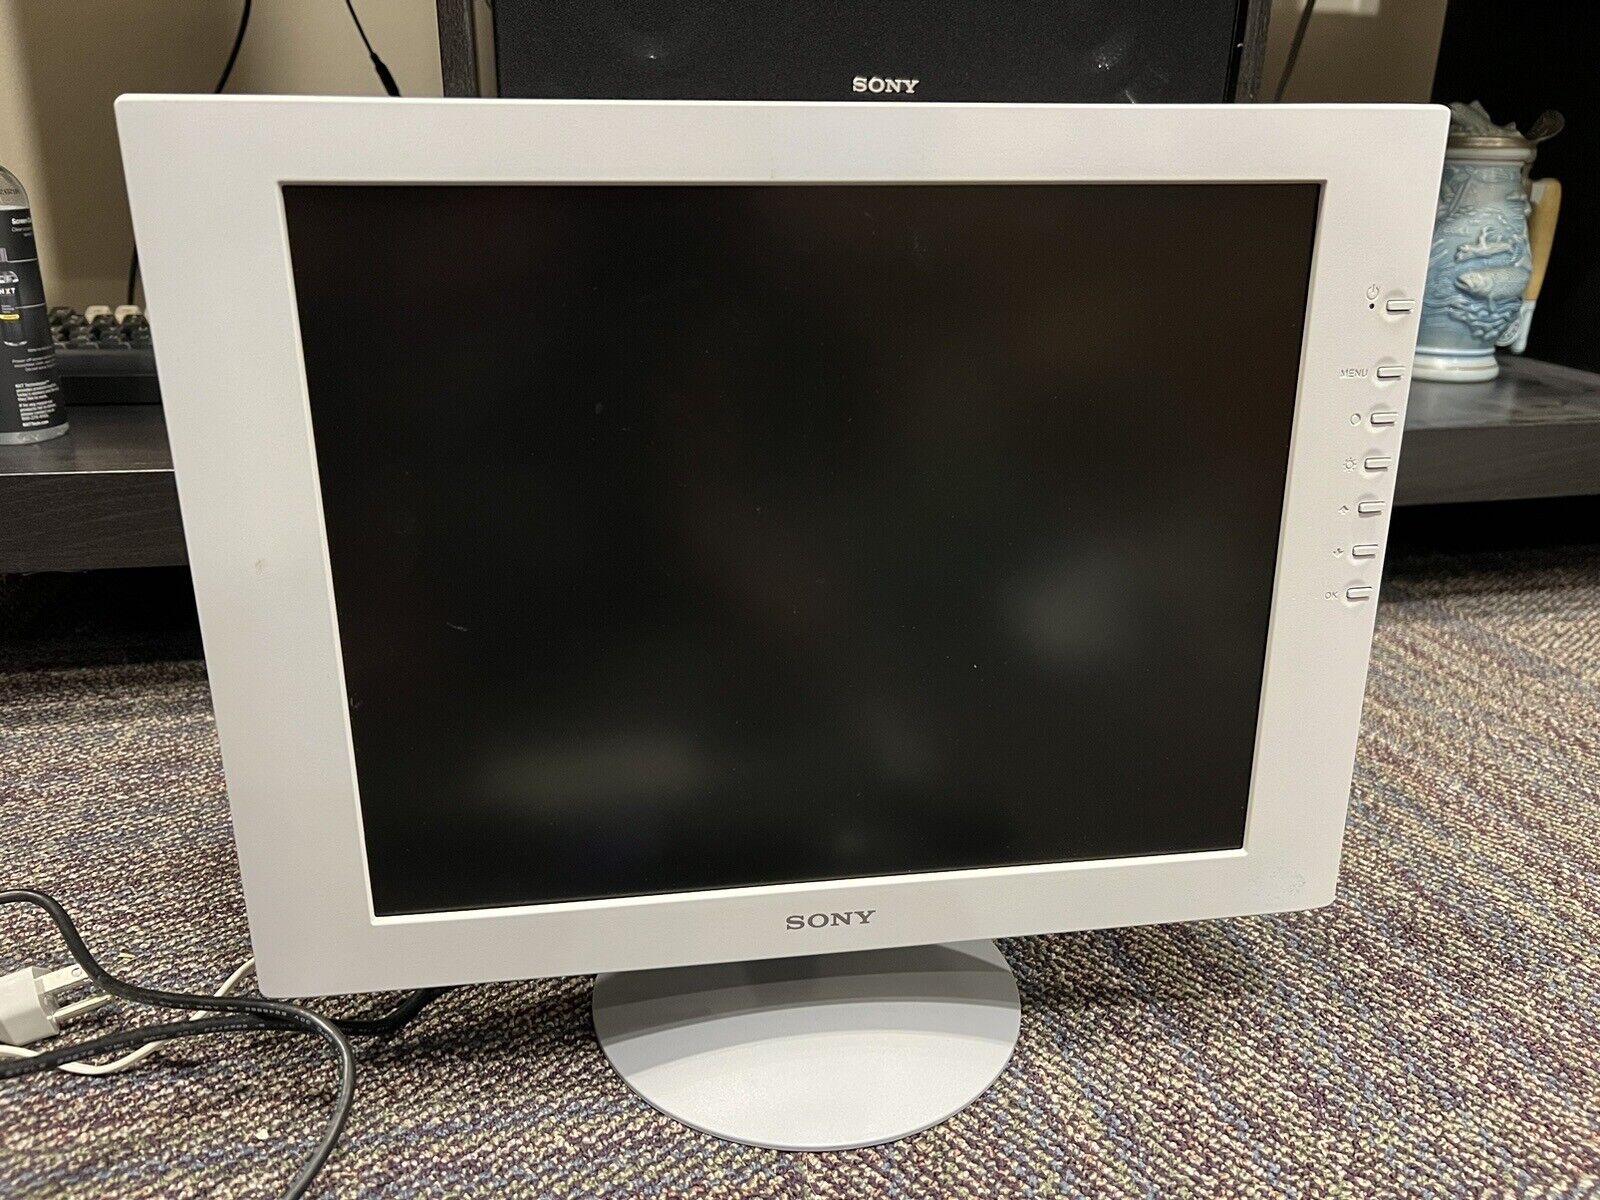 Sony SDM-S51  -TFT LCD Computer Monitor. TESTED WORKING